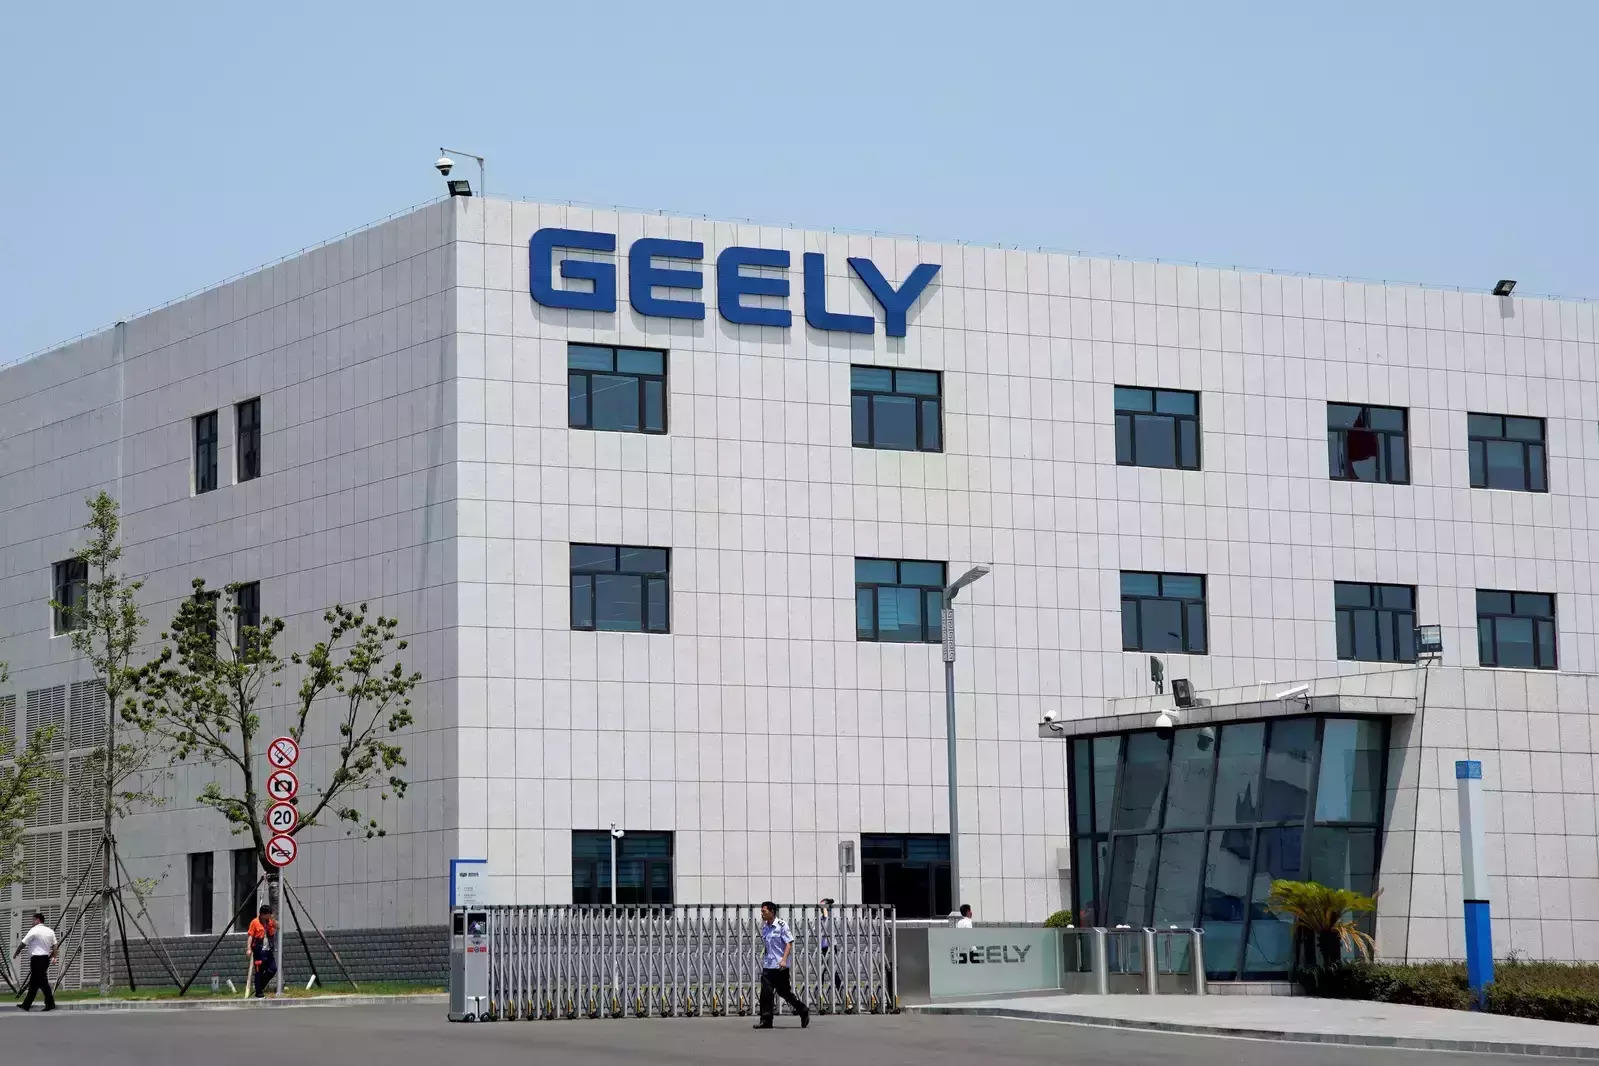 geely auto sales in china: China's Geely Auto grows EV ambition as fossil  fuel vehicle demand sinks